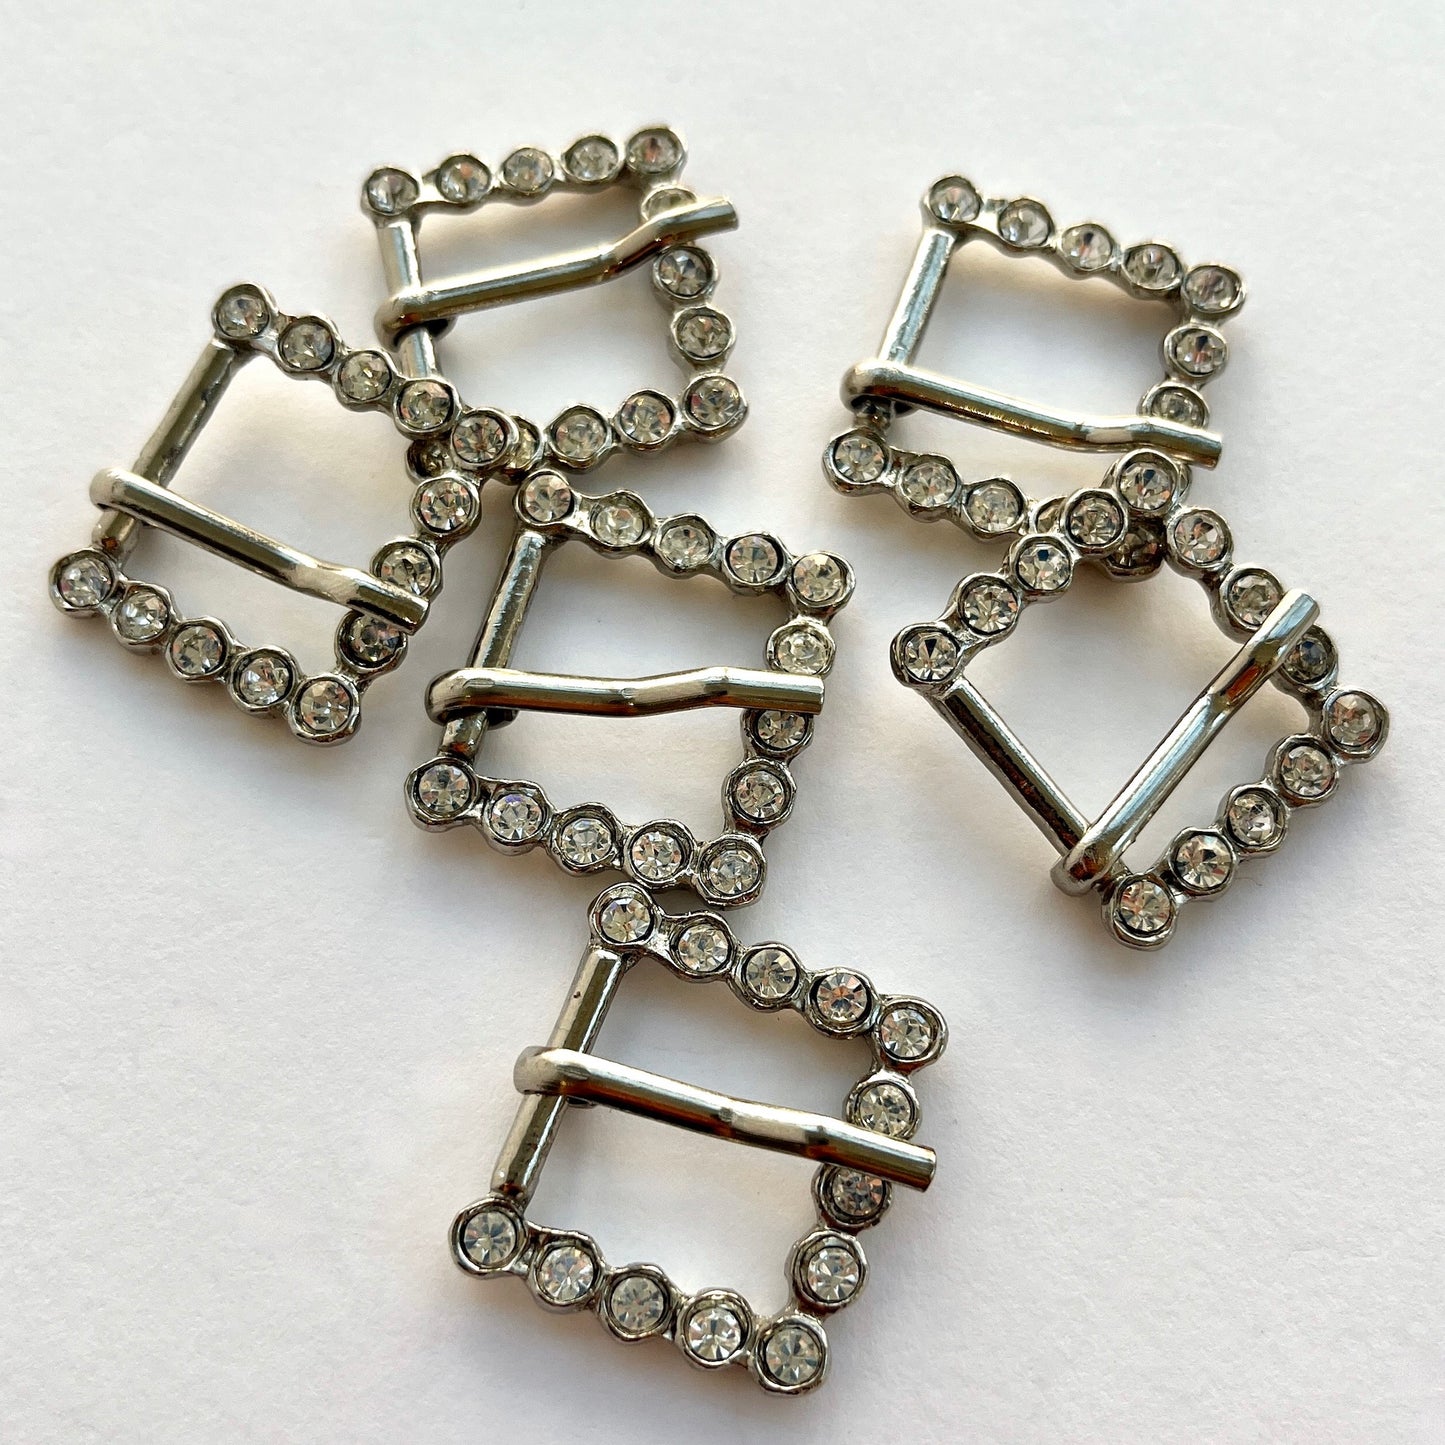 Small silver rectangle diamante buckle. Use as a belt buckle, an accent for straps, dressmaking projects or as an embellishment for handbags, wedding invitations, wedding favours, napkin rings and arts and craft projects. Would fit an approximate belt or strap width of 2cm